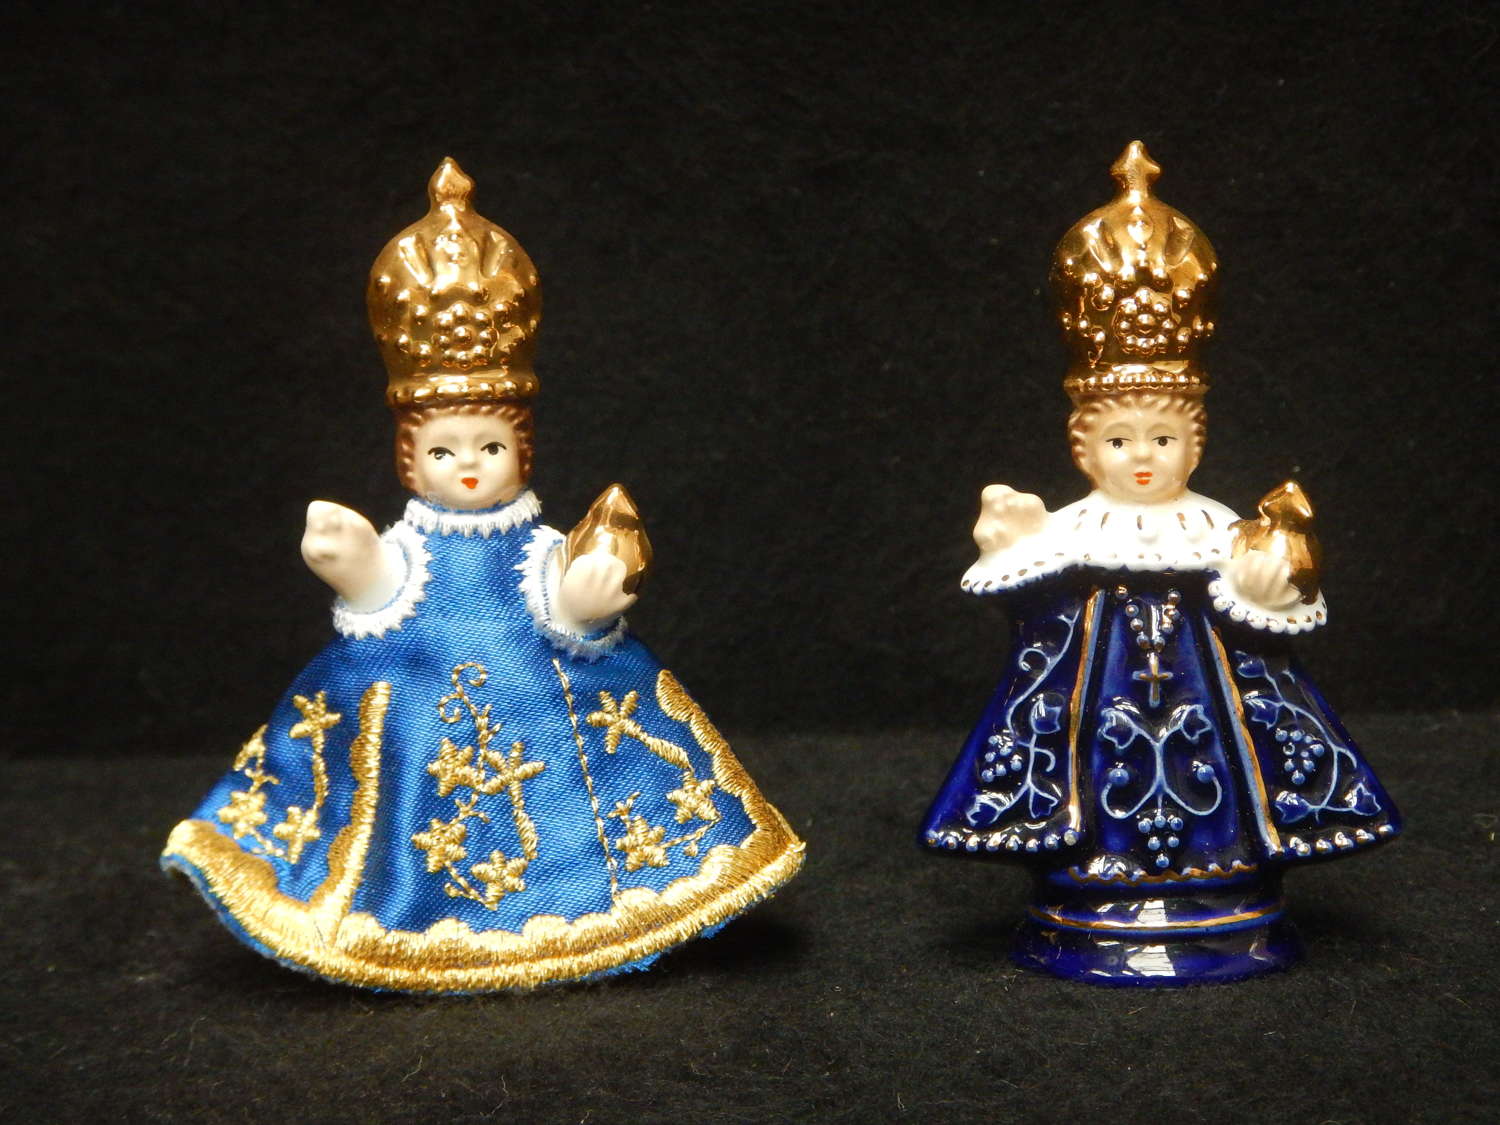 Pair of Miniature Child of Prague Statues in their Boxes